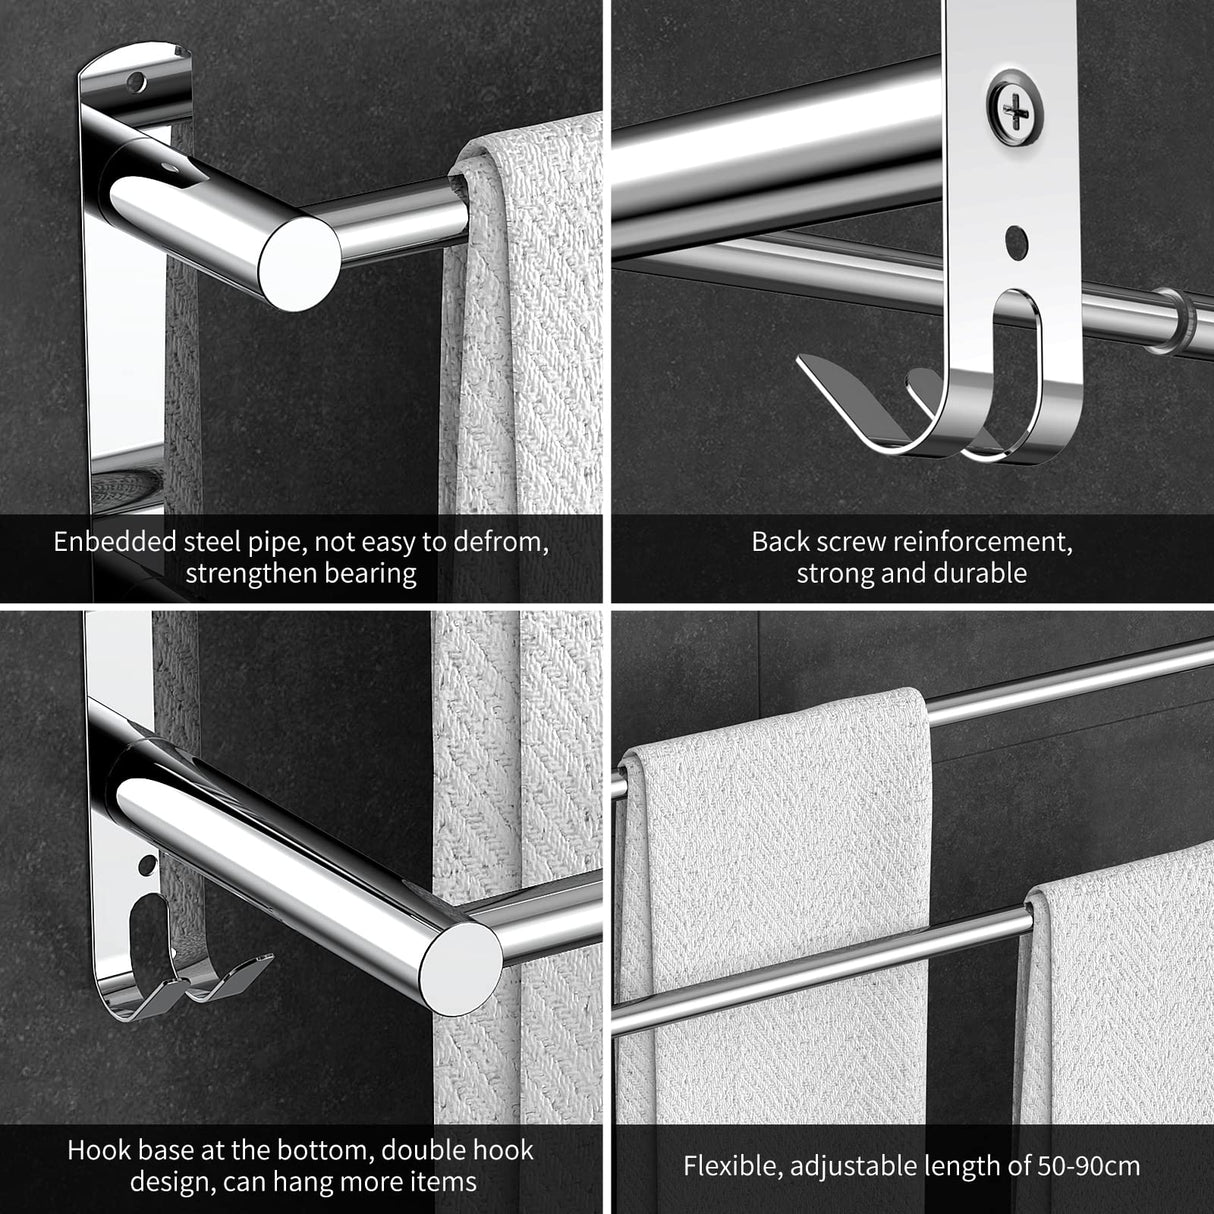 Stretchable 24-30 Inches Towel Bar for Bathroom Kitchen Hand Towel Holder Dish Cloths Hanger SUS304 Stainless Steel RUSTPROOF Wall Mount No Drill Sdjustable (Two BAR)